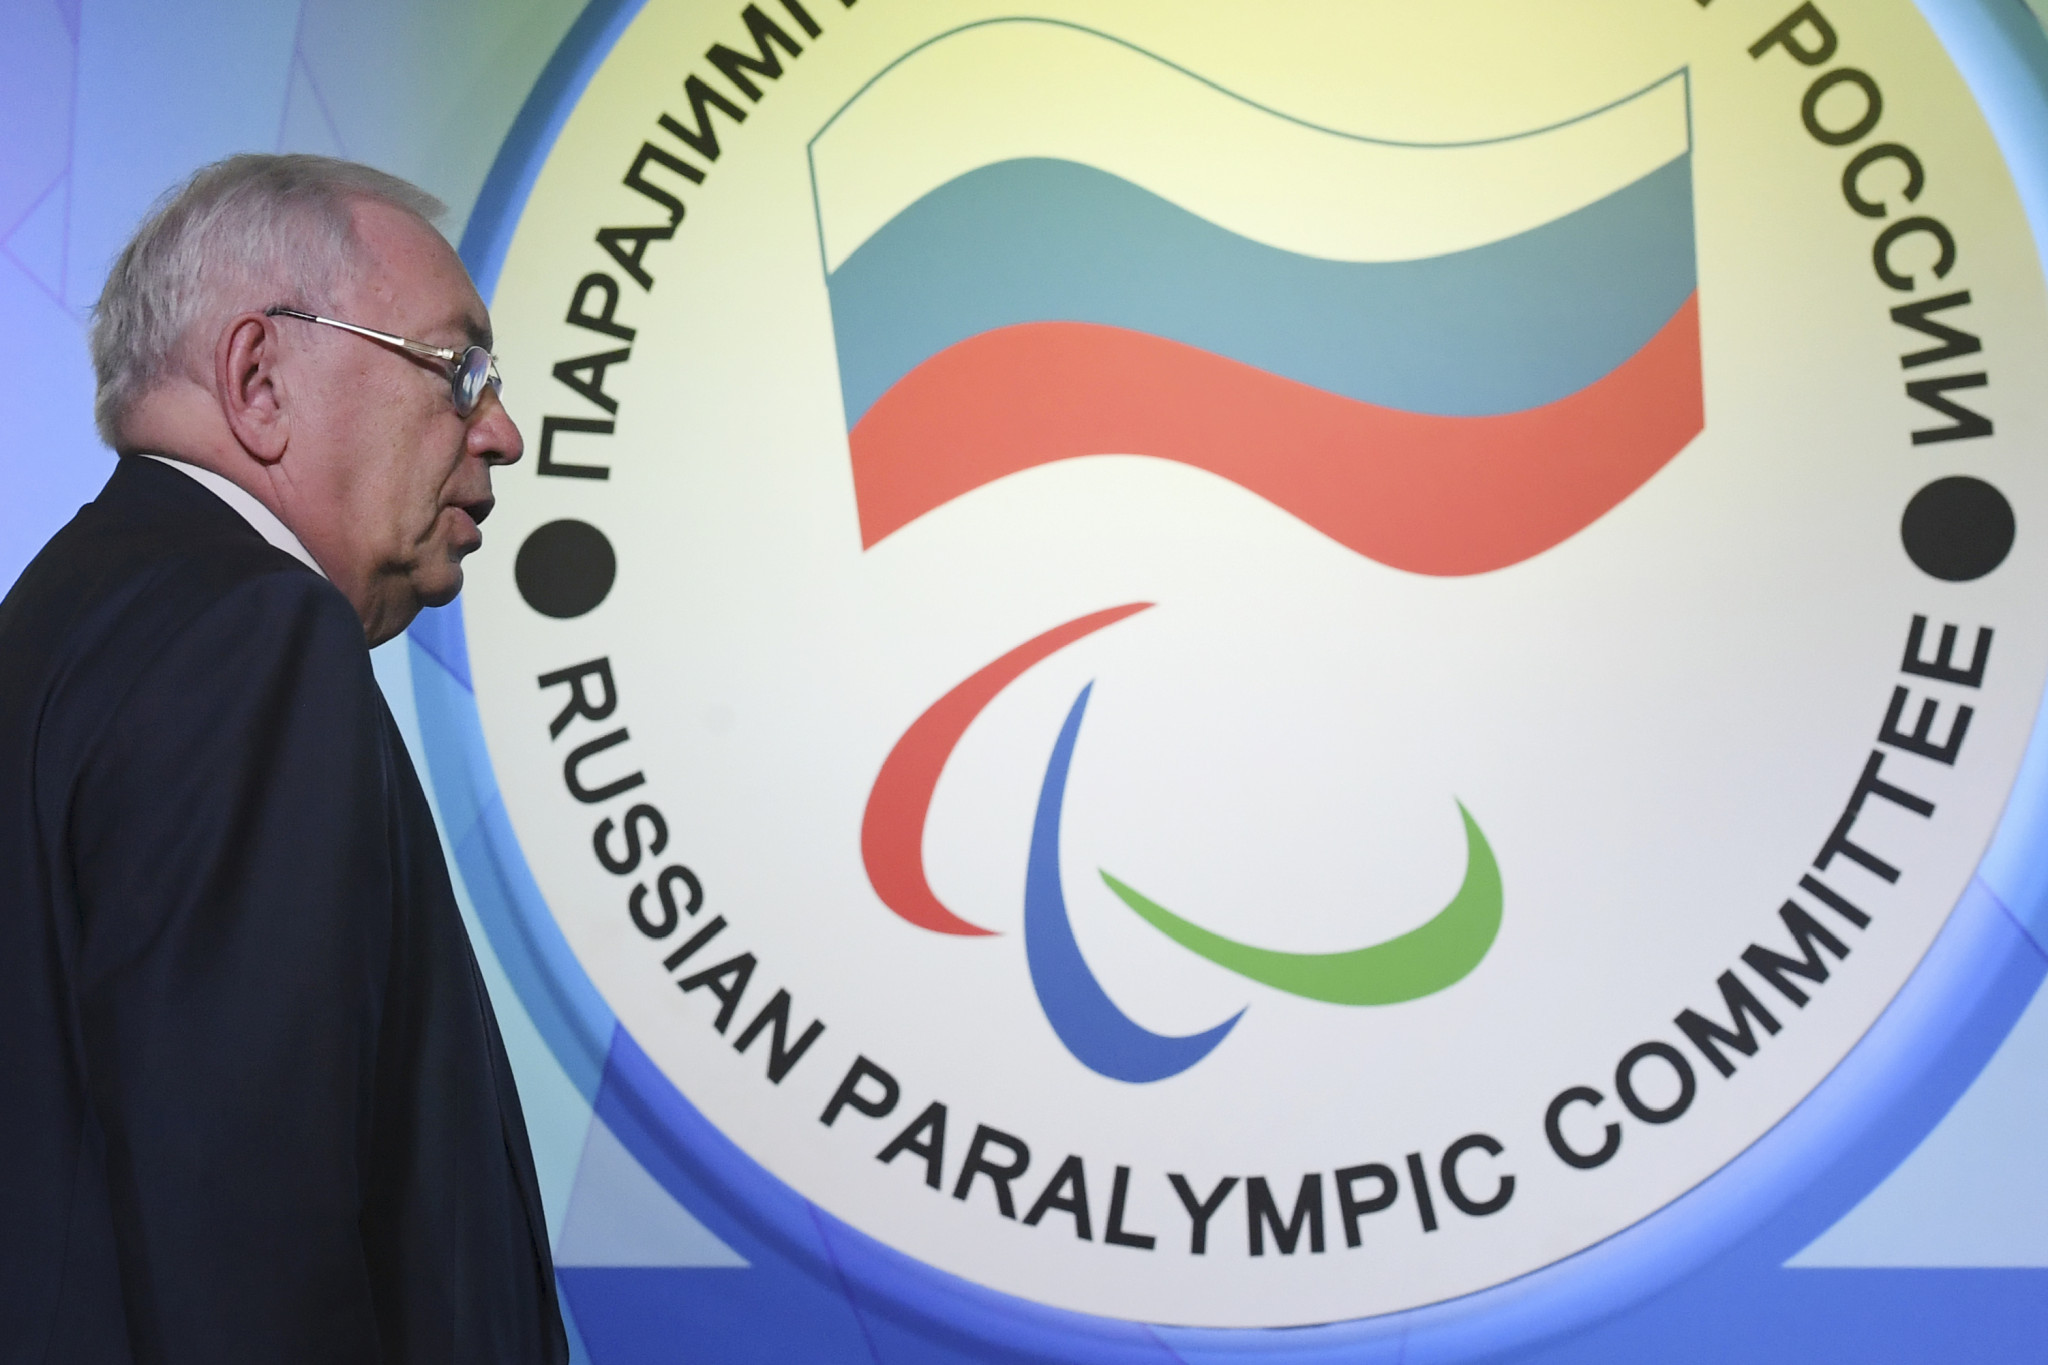 Russian Paralympic Committee "optimistic" over IPC reinstatement this week